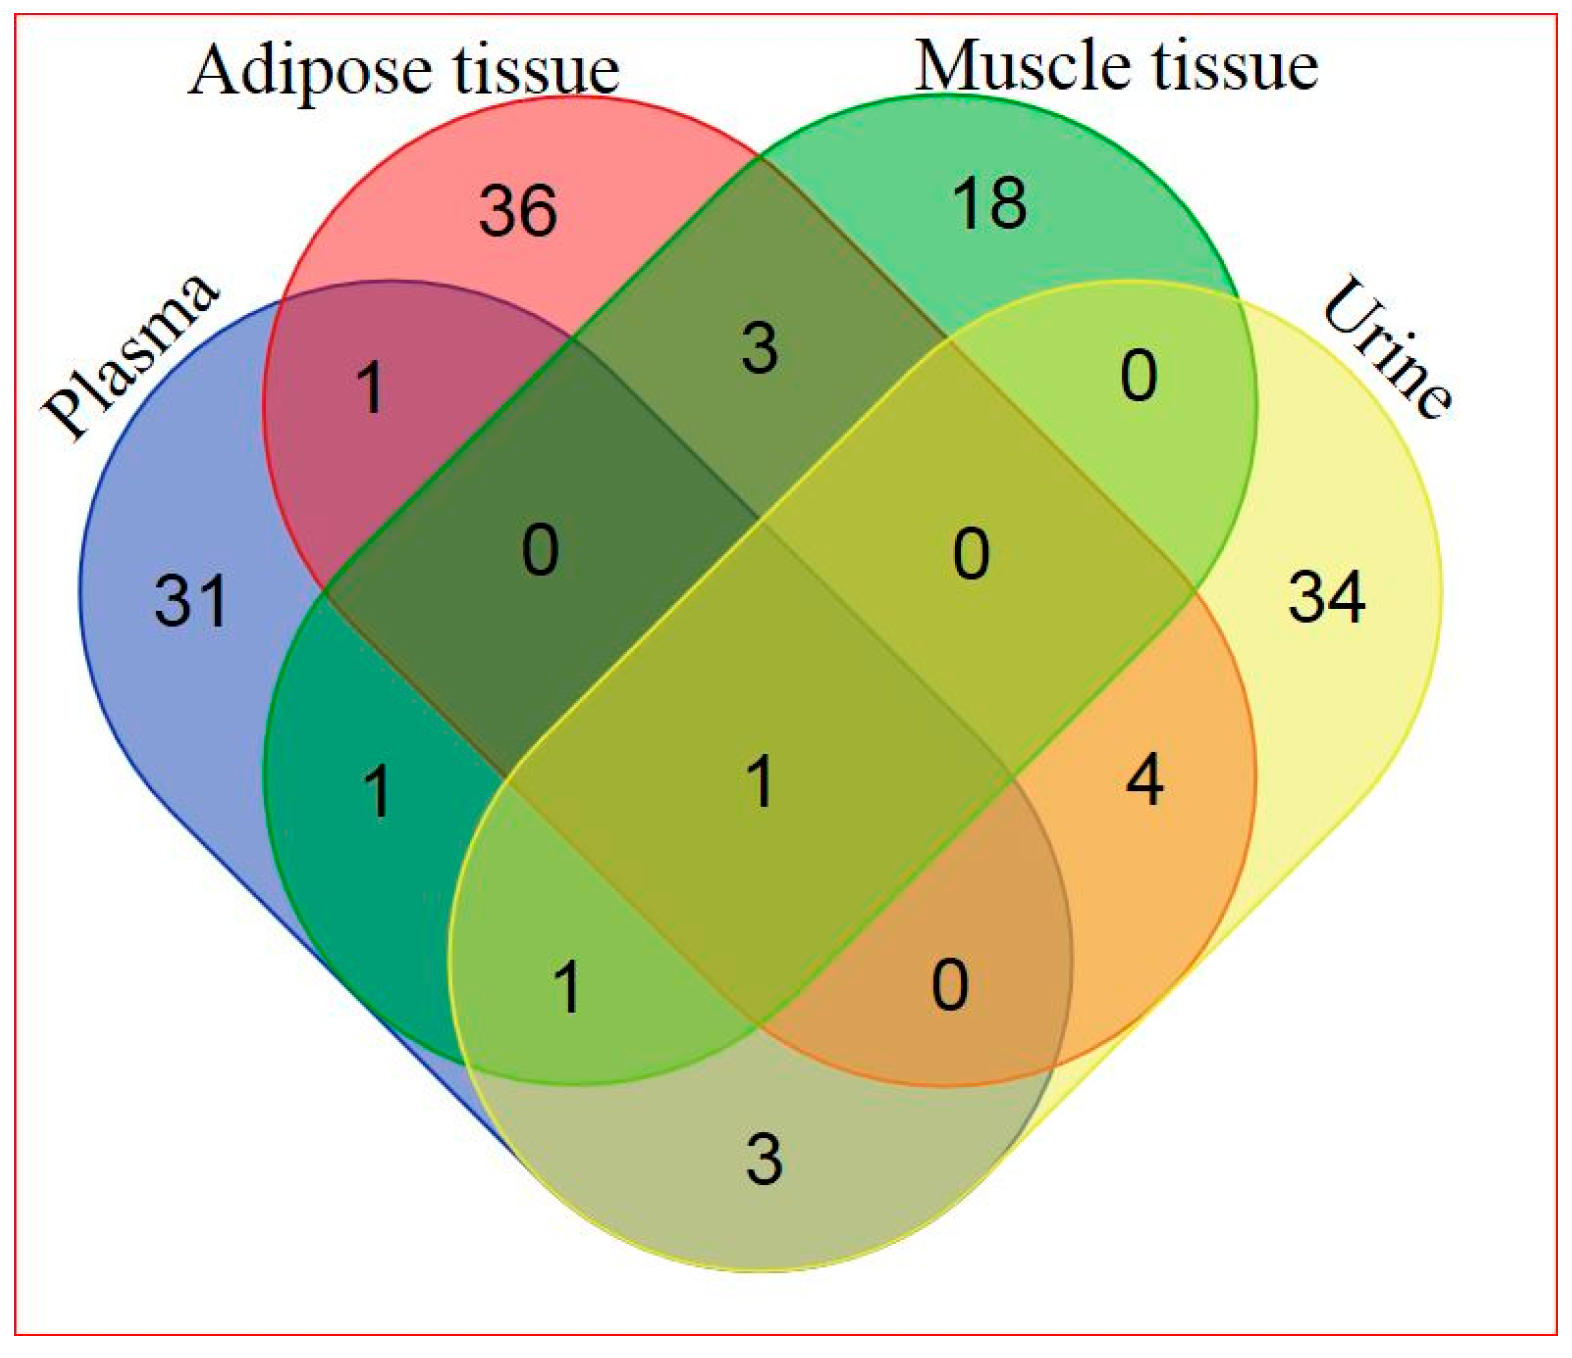 IJMS | Free Full-Text | Comprehensive Metabolomic Analysis in Blood, Urine,  Fat, and Muscle in Men with Metabolic Syndrome: A Randomized,  Placebo-Controlled Clinical Trial on the Effects of Resveratrol after Four  Months'